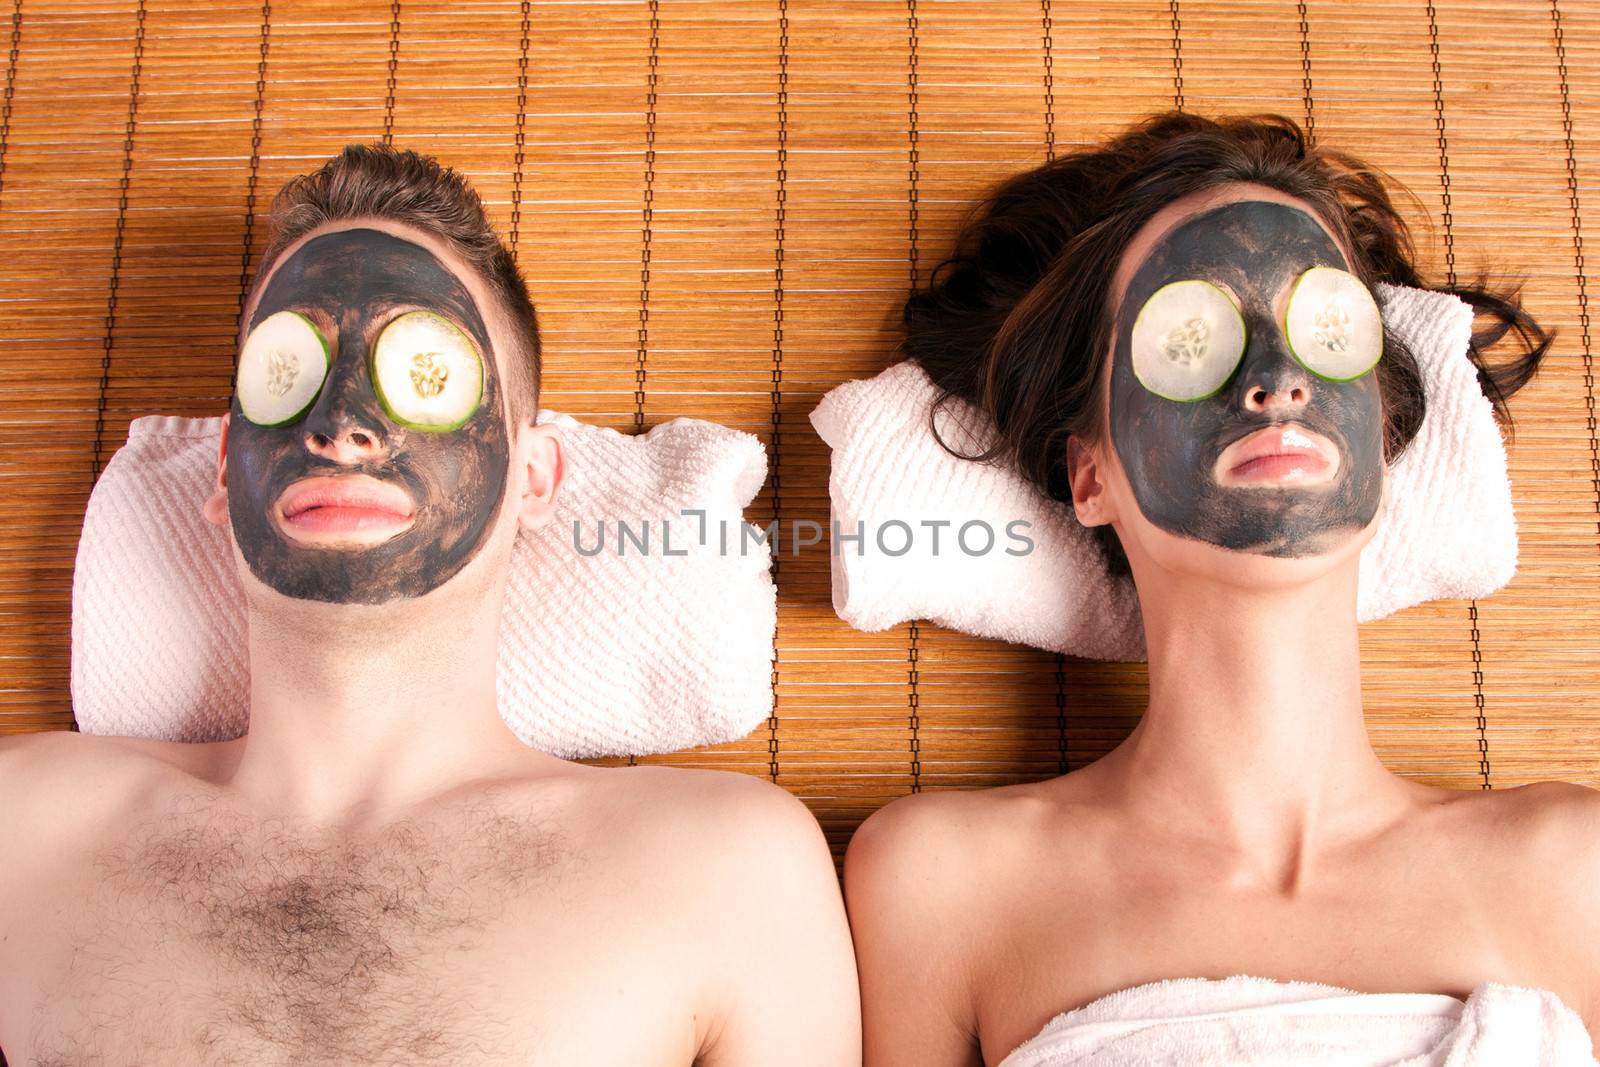 Couples holiday retreat at spa getting facial mask with cucumber skincare relaxing beauty treatment on bamboo.